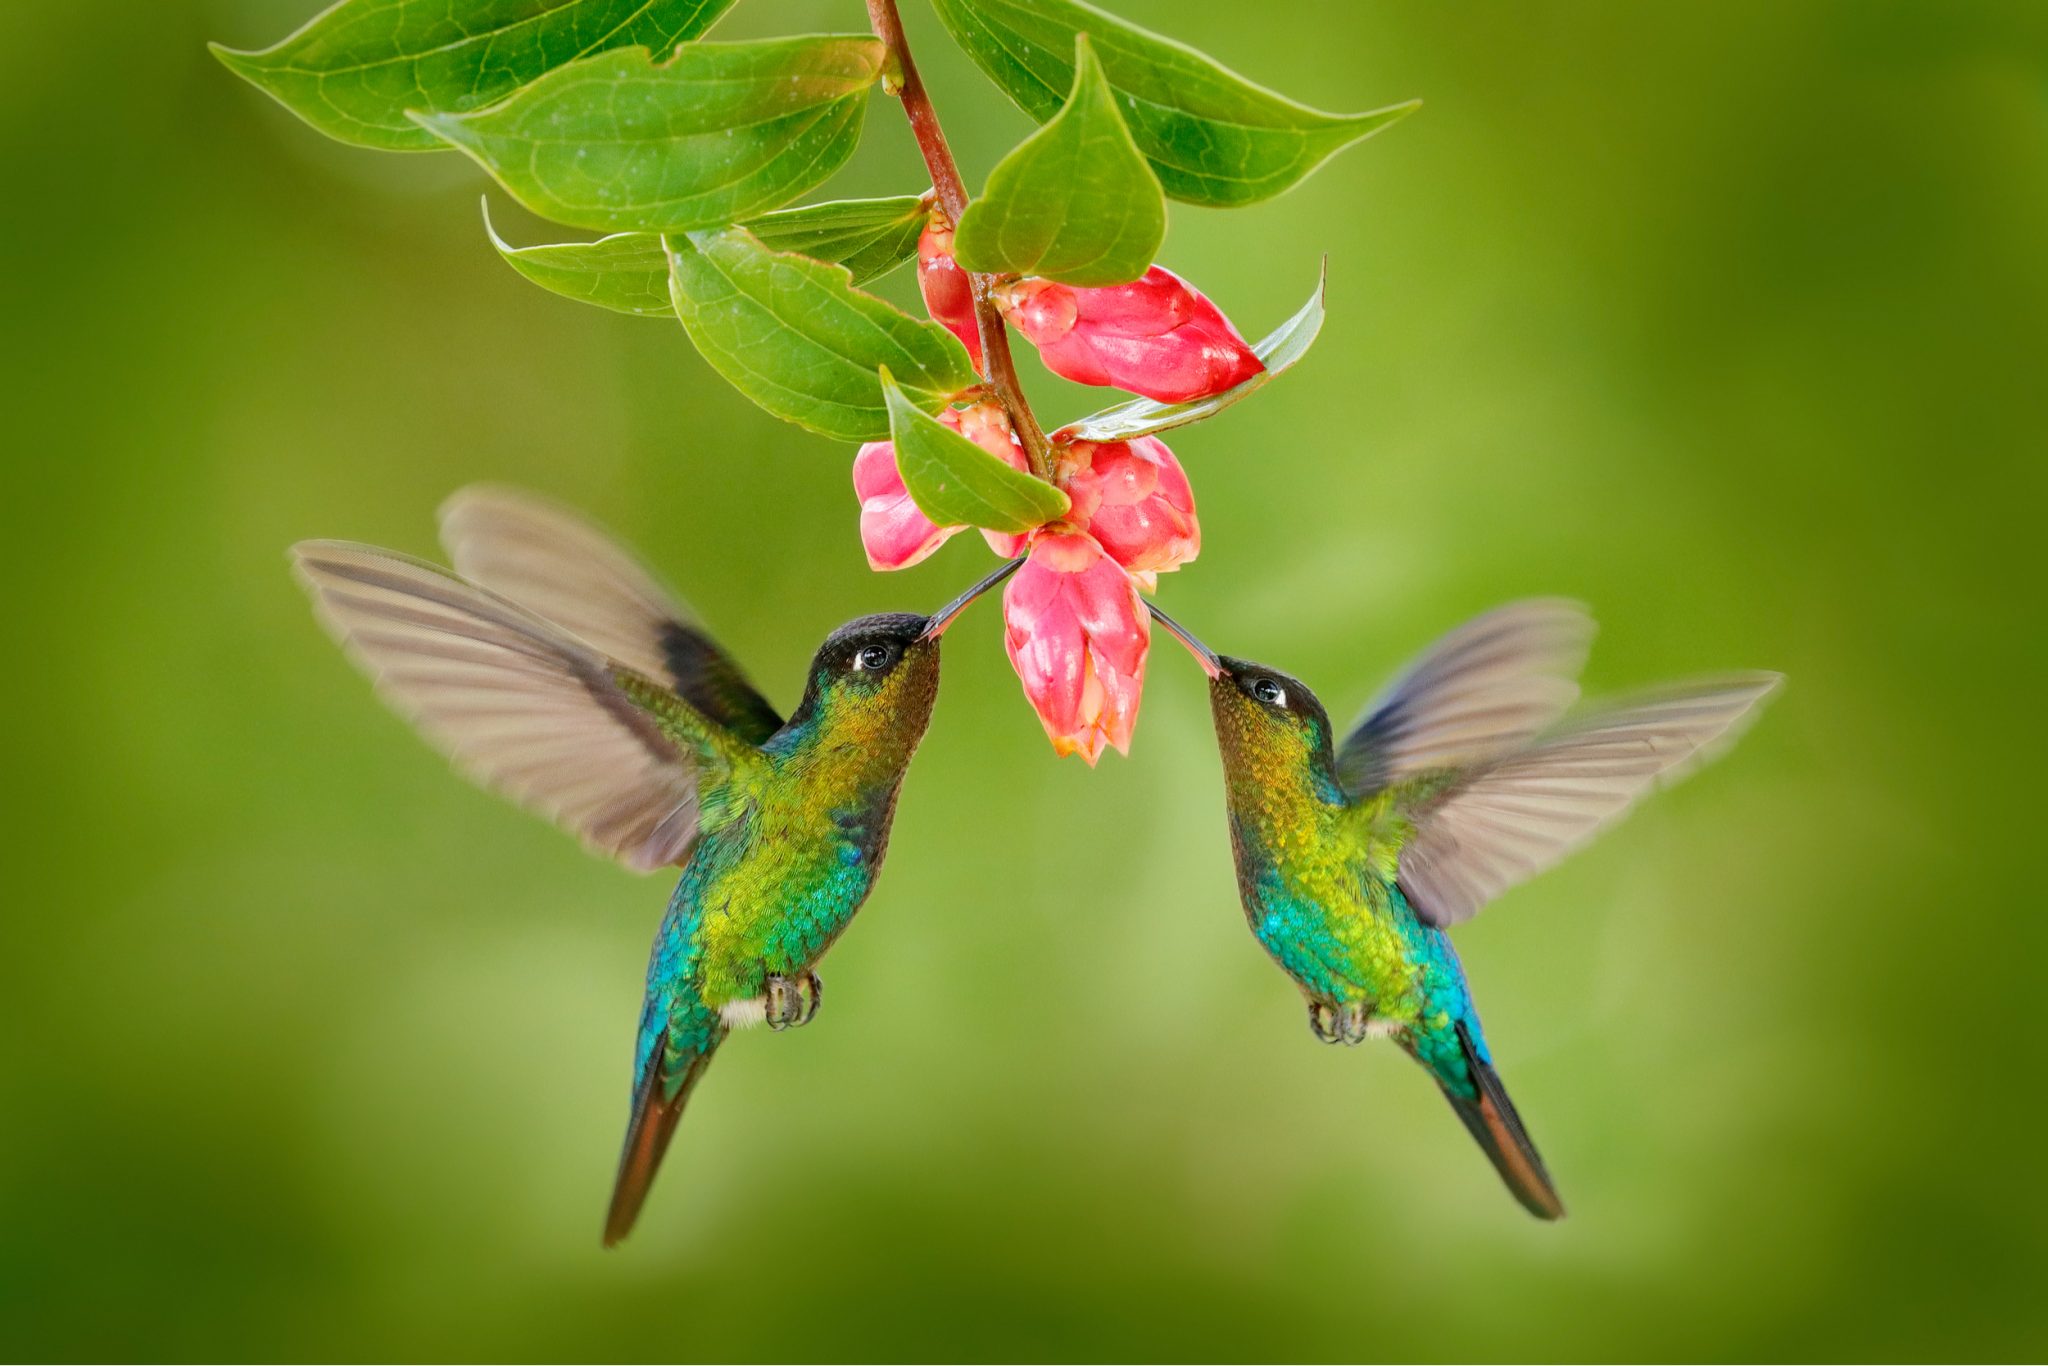 How to Attract Hummingbirds to Your Backyard